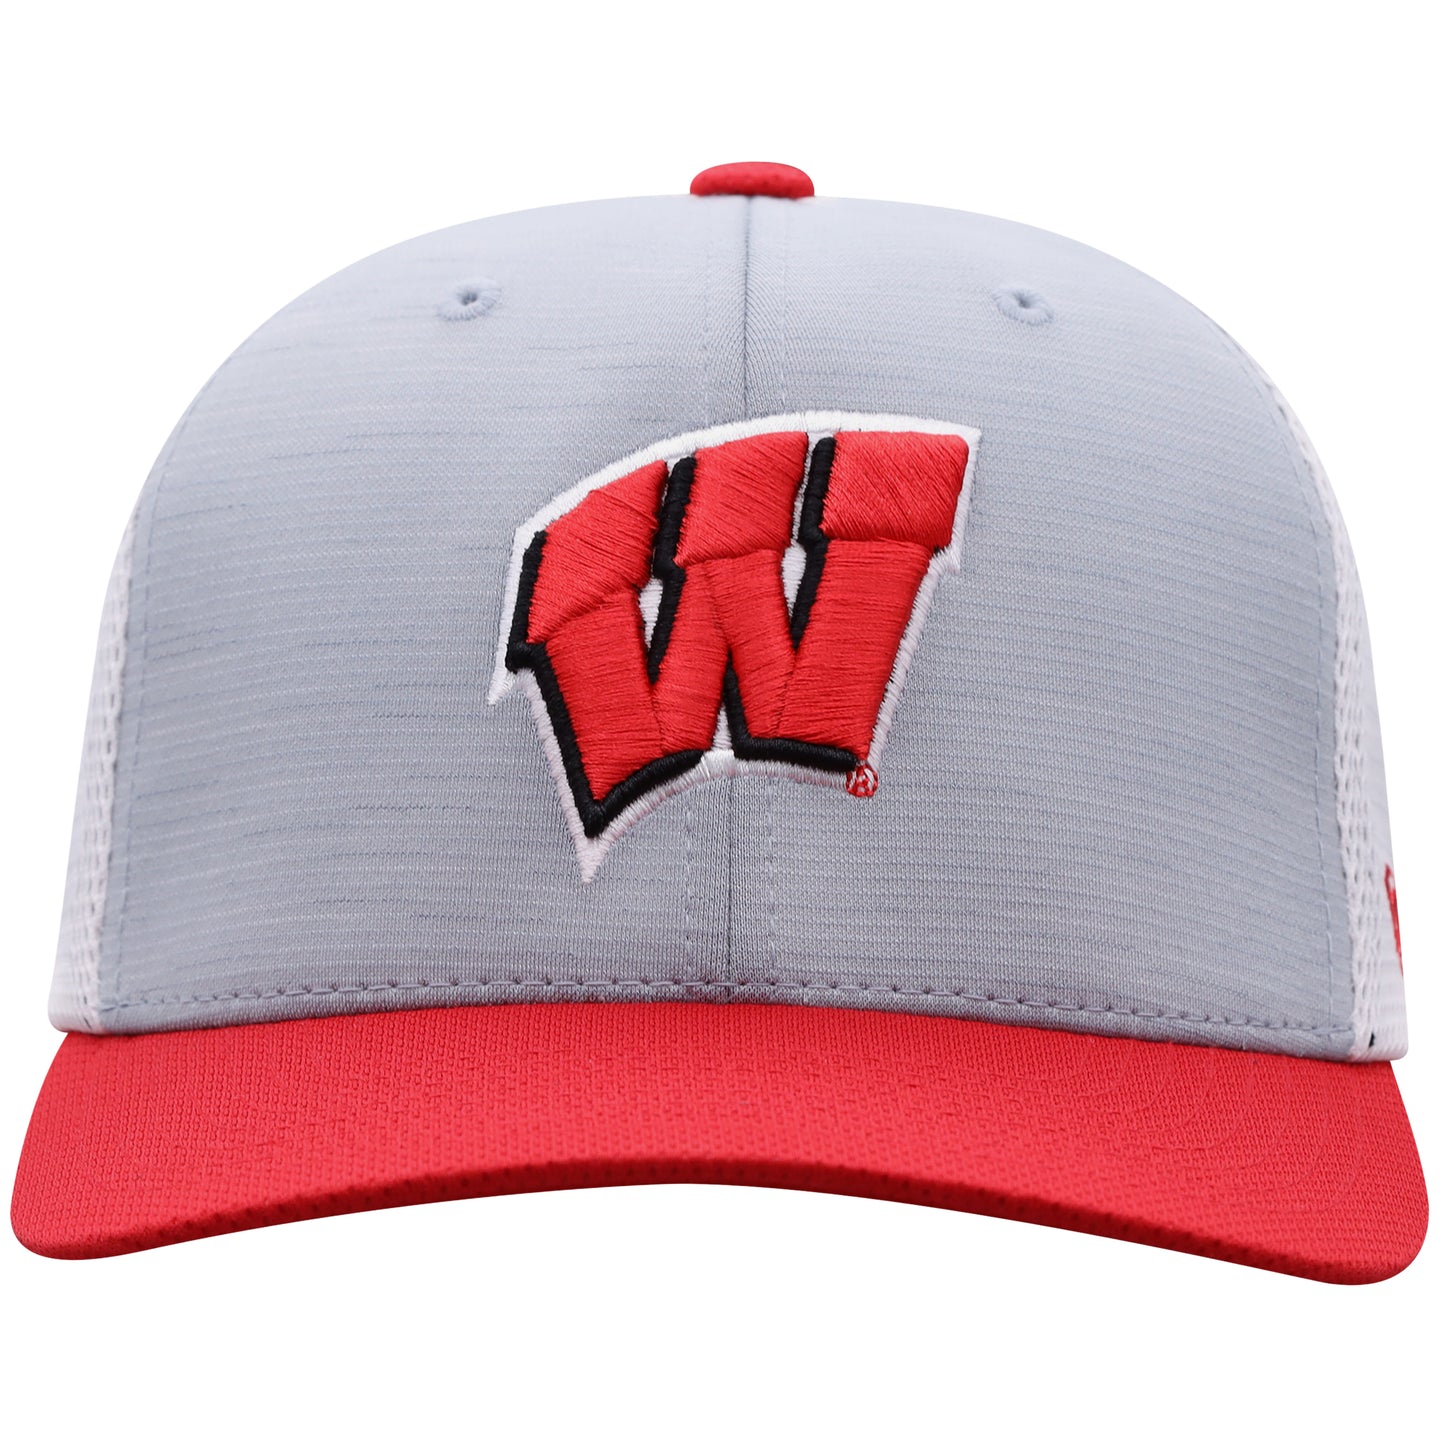 Men's Wisconsin Badgers Stamp 3-Tone Flex Fit Hat By Top Of the World